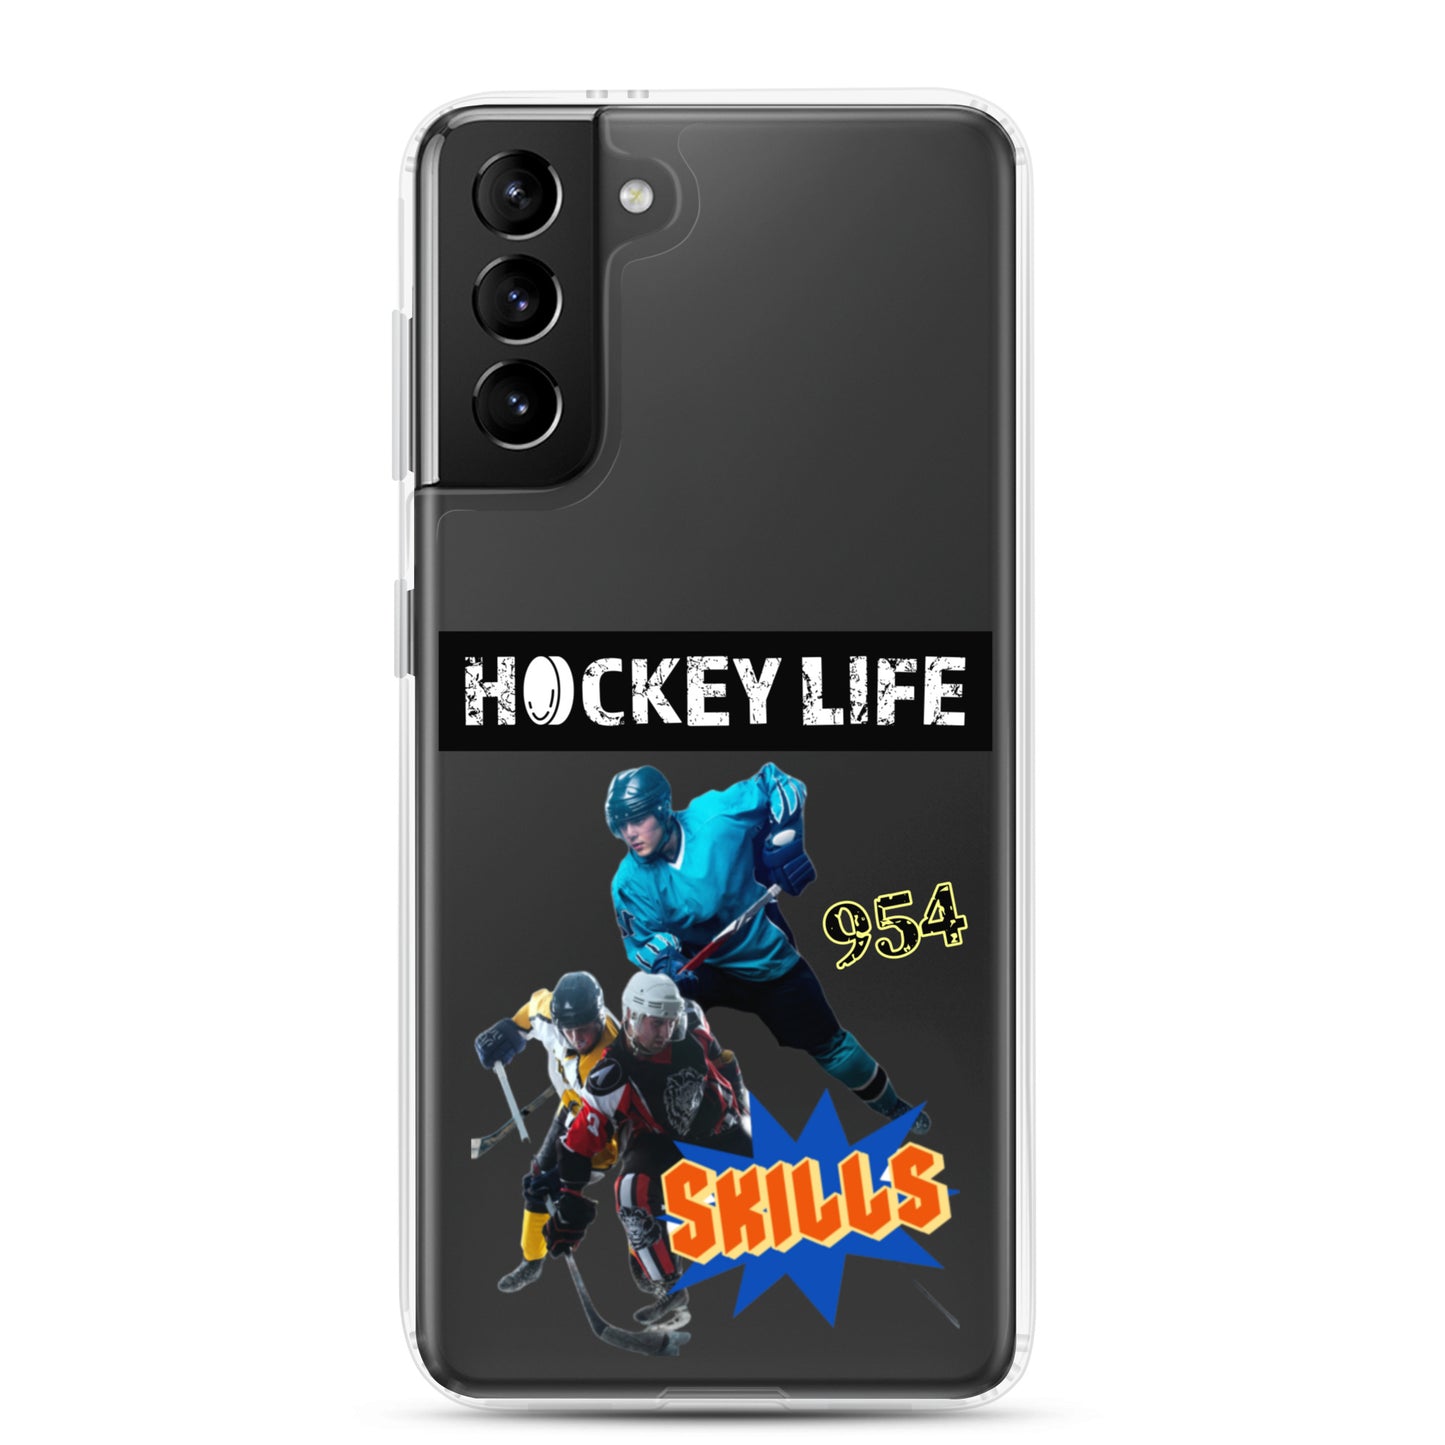 Hockey LIfe 954 Signature Clear Case for Samsung®